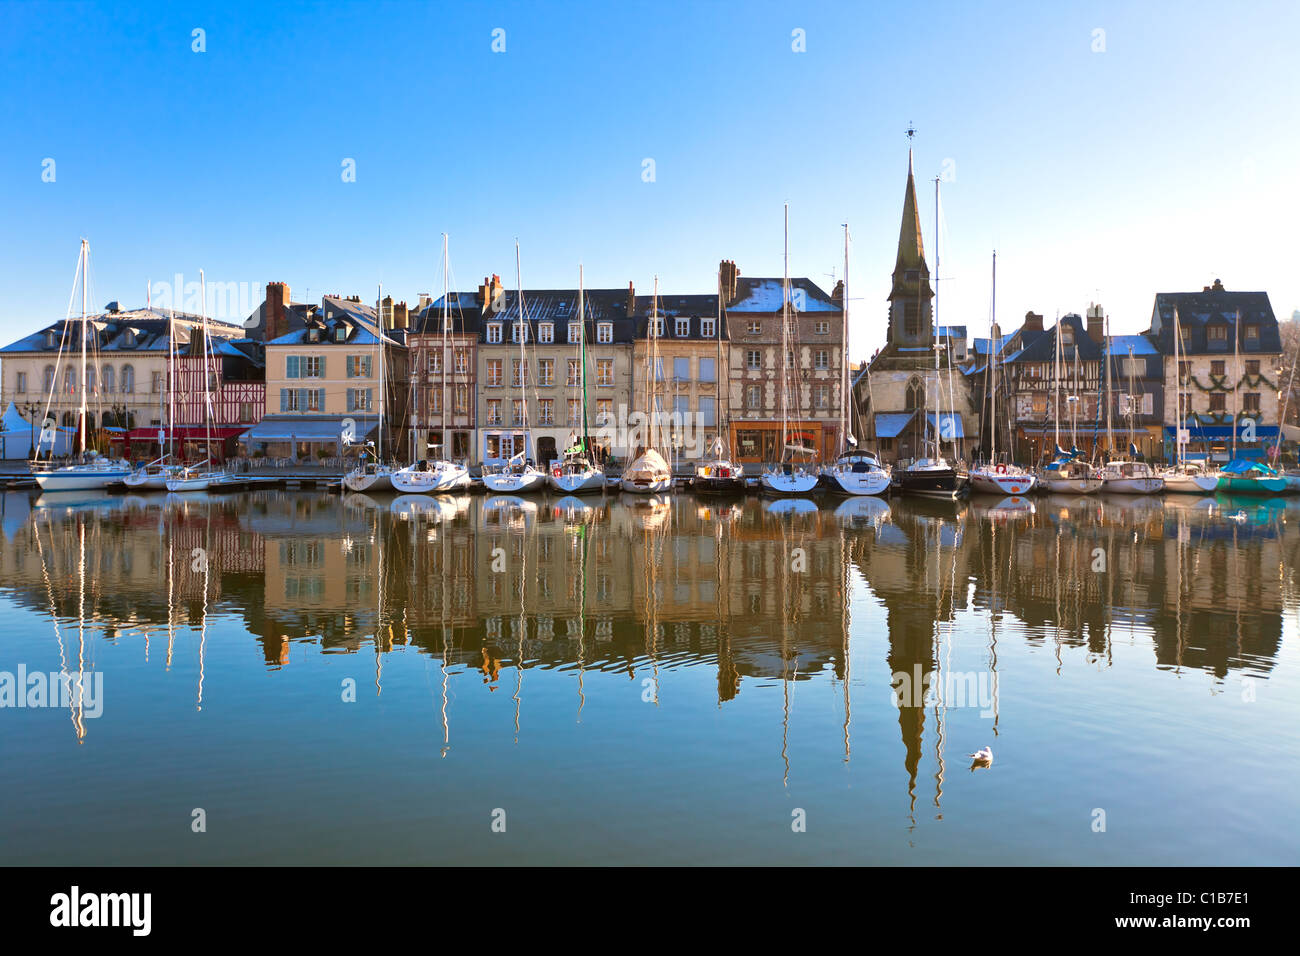 Honfleur harbour in Normandy, France. Old houses and their reflection ...